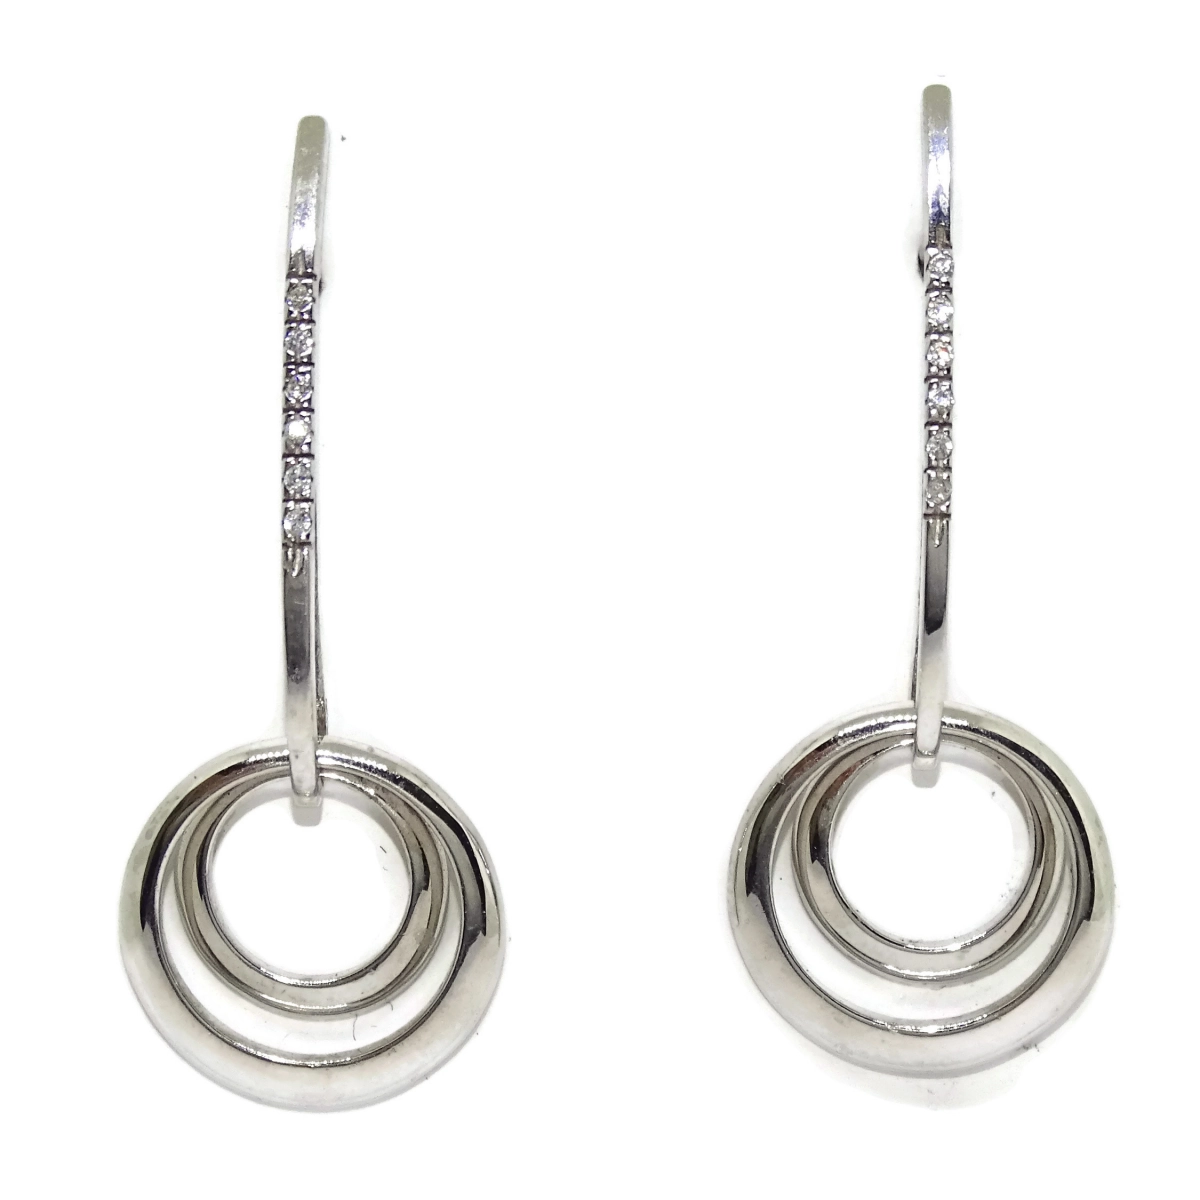 Long earrings double hoop with bar with 12 zirconitas of the best quality. 3.80cm long. Cierr Never say never